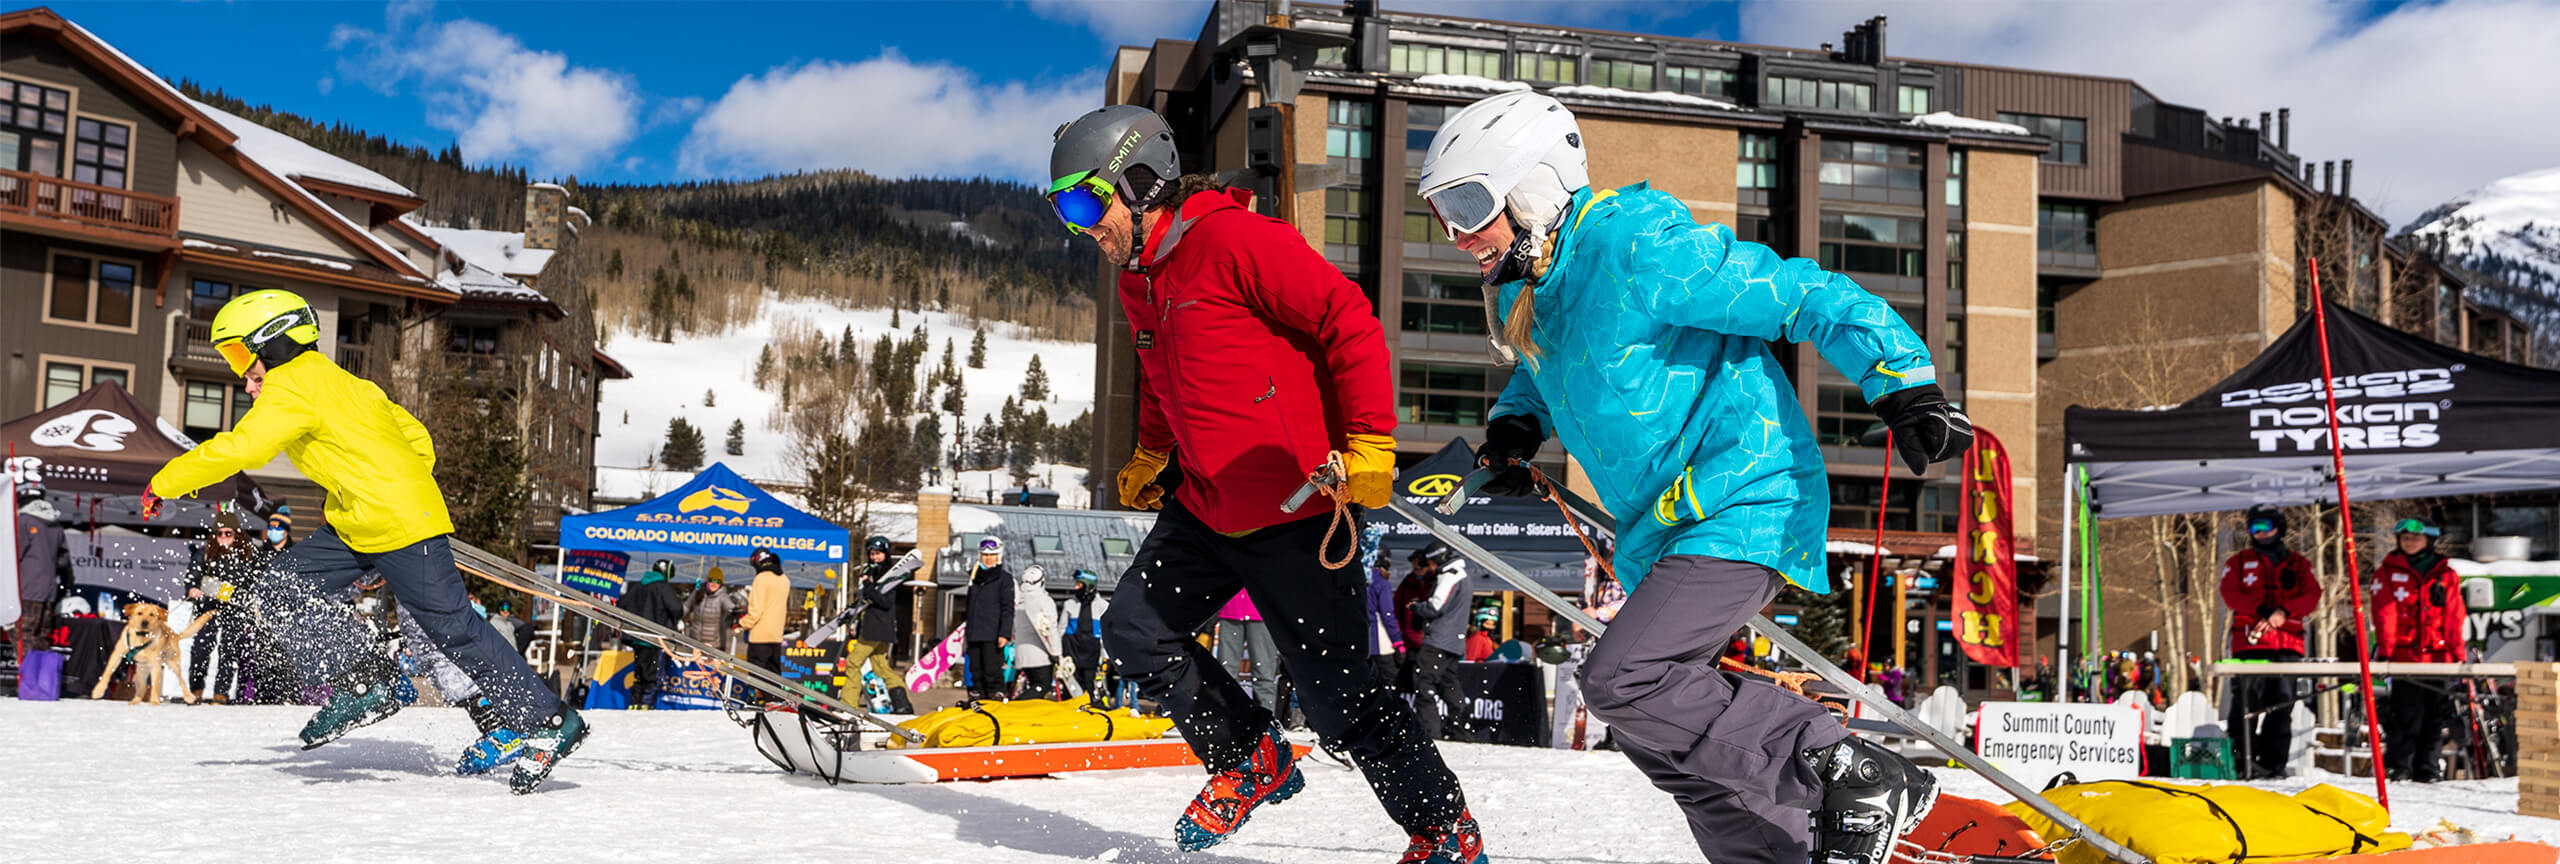 People running with ski patrol sleds at SafetyFest at Copper Mountain